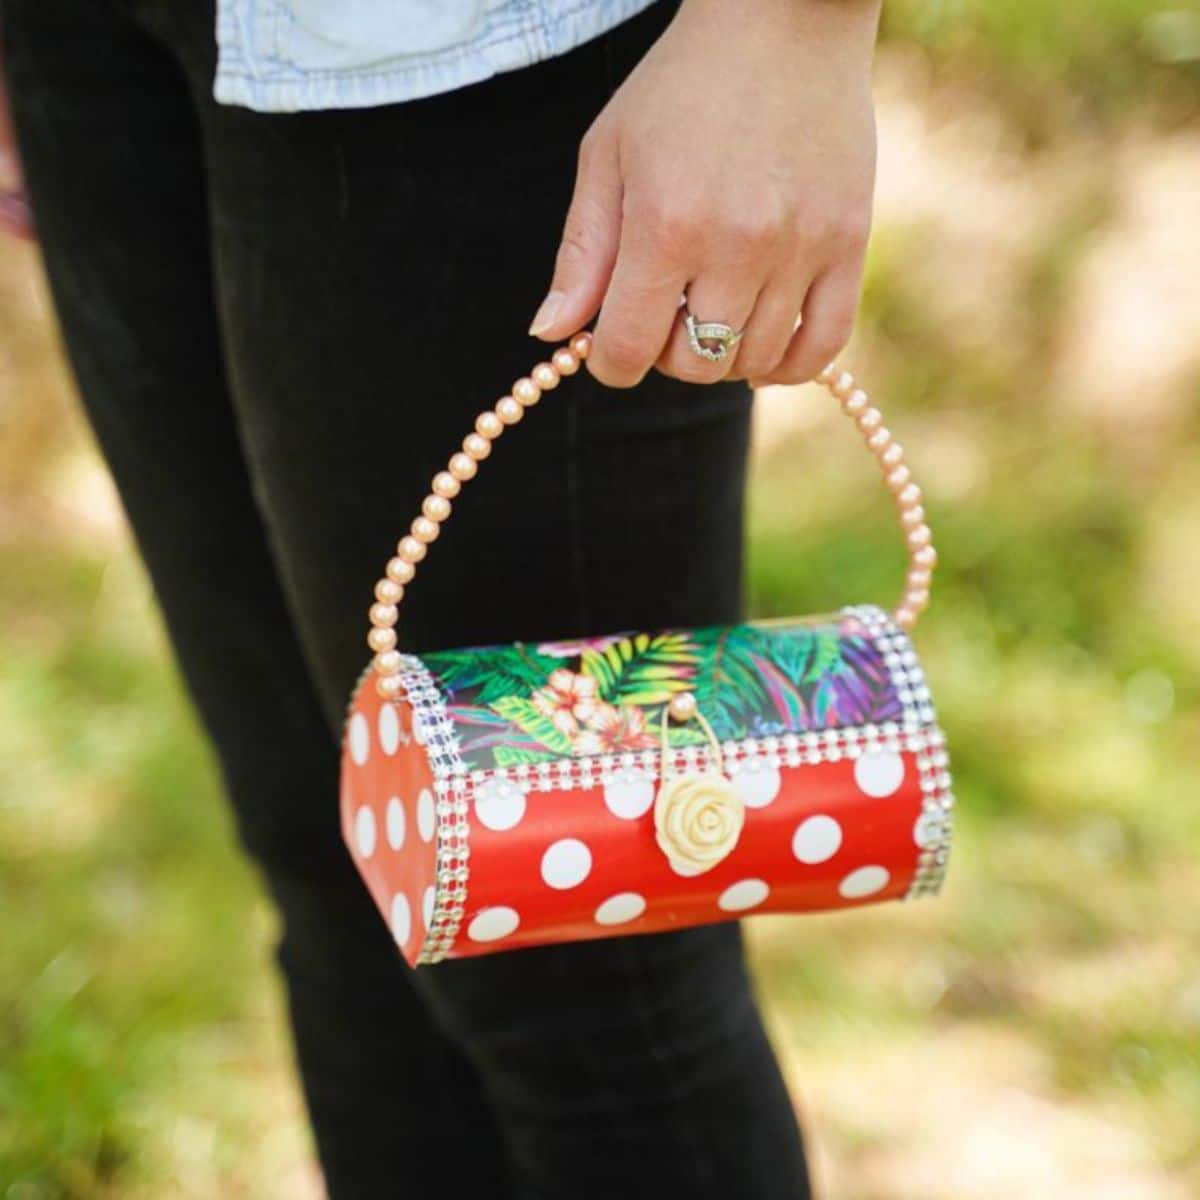 handbags made from recycled materials  Recycle cans, Plastic bag crafts,  How to make handbags